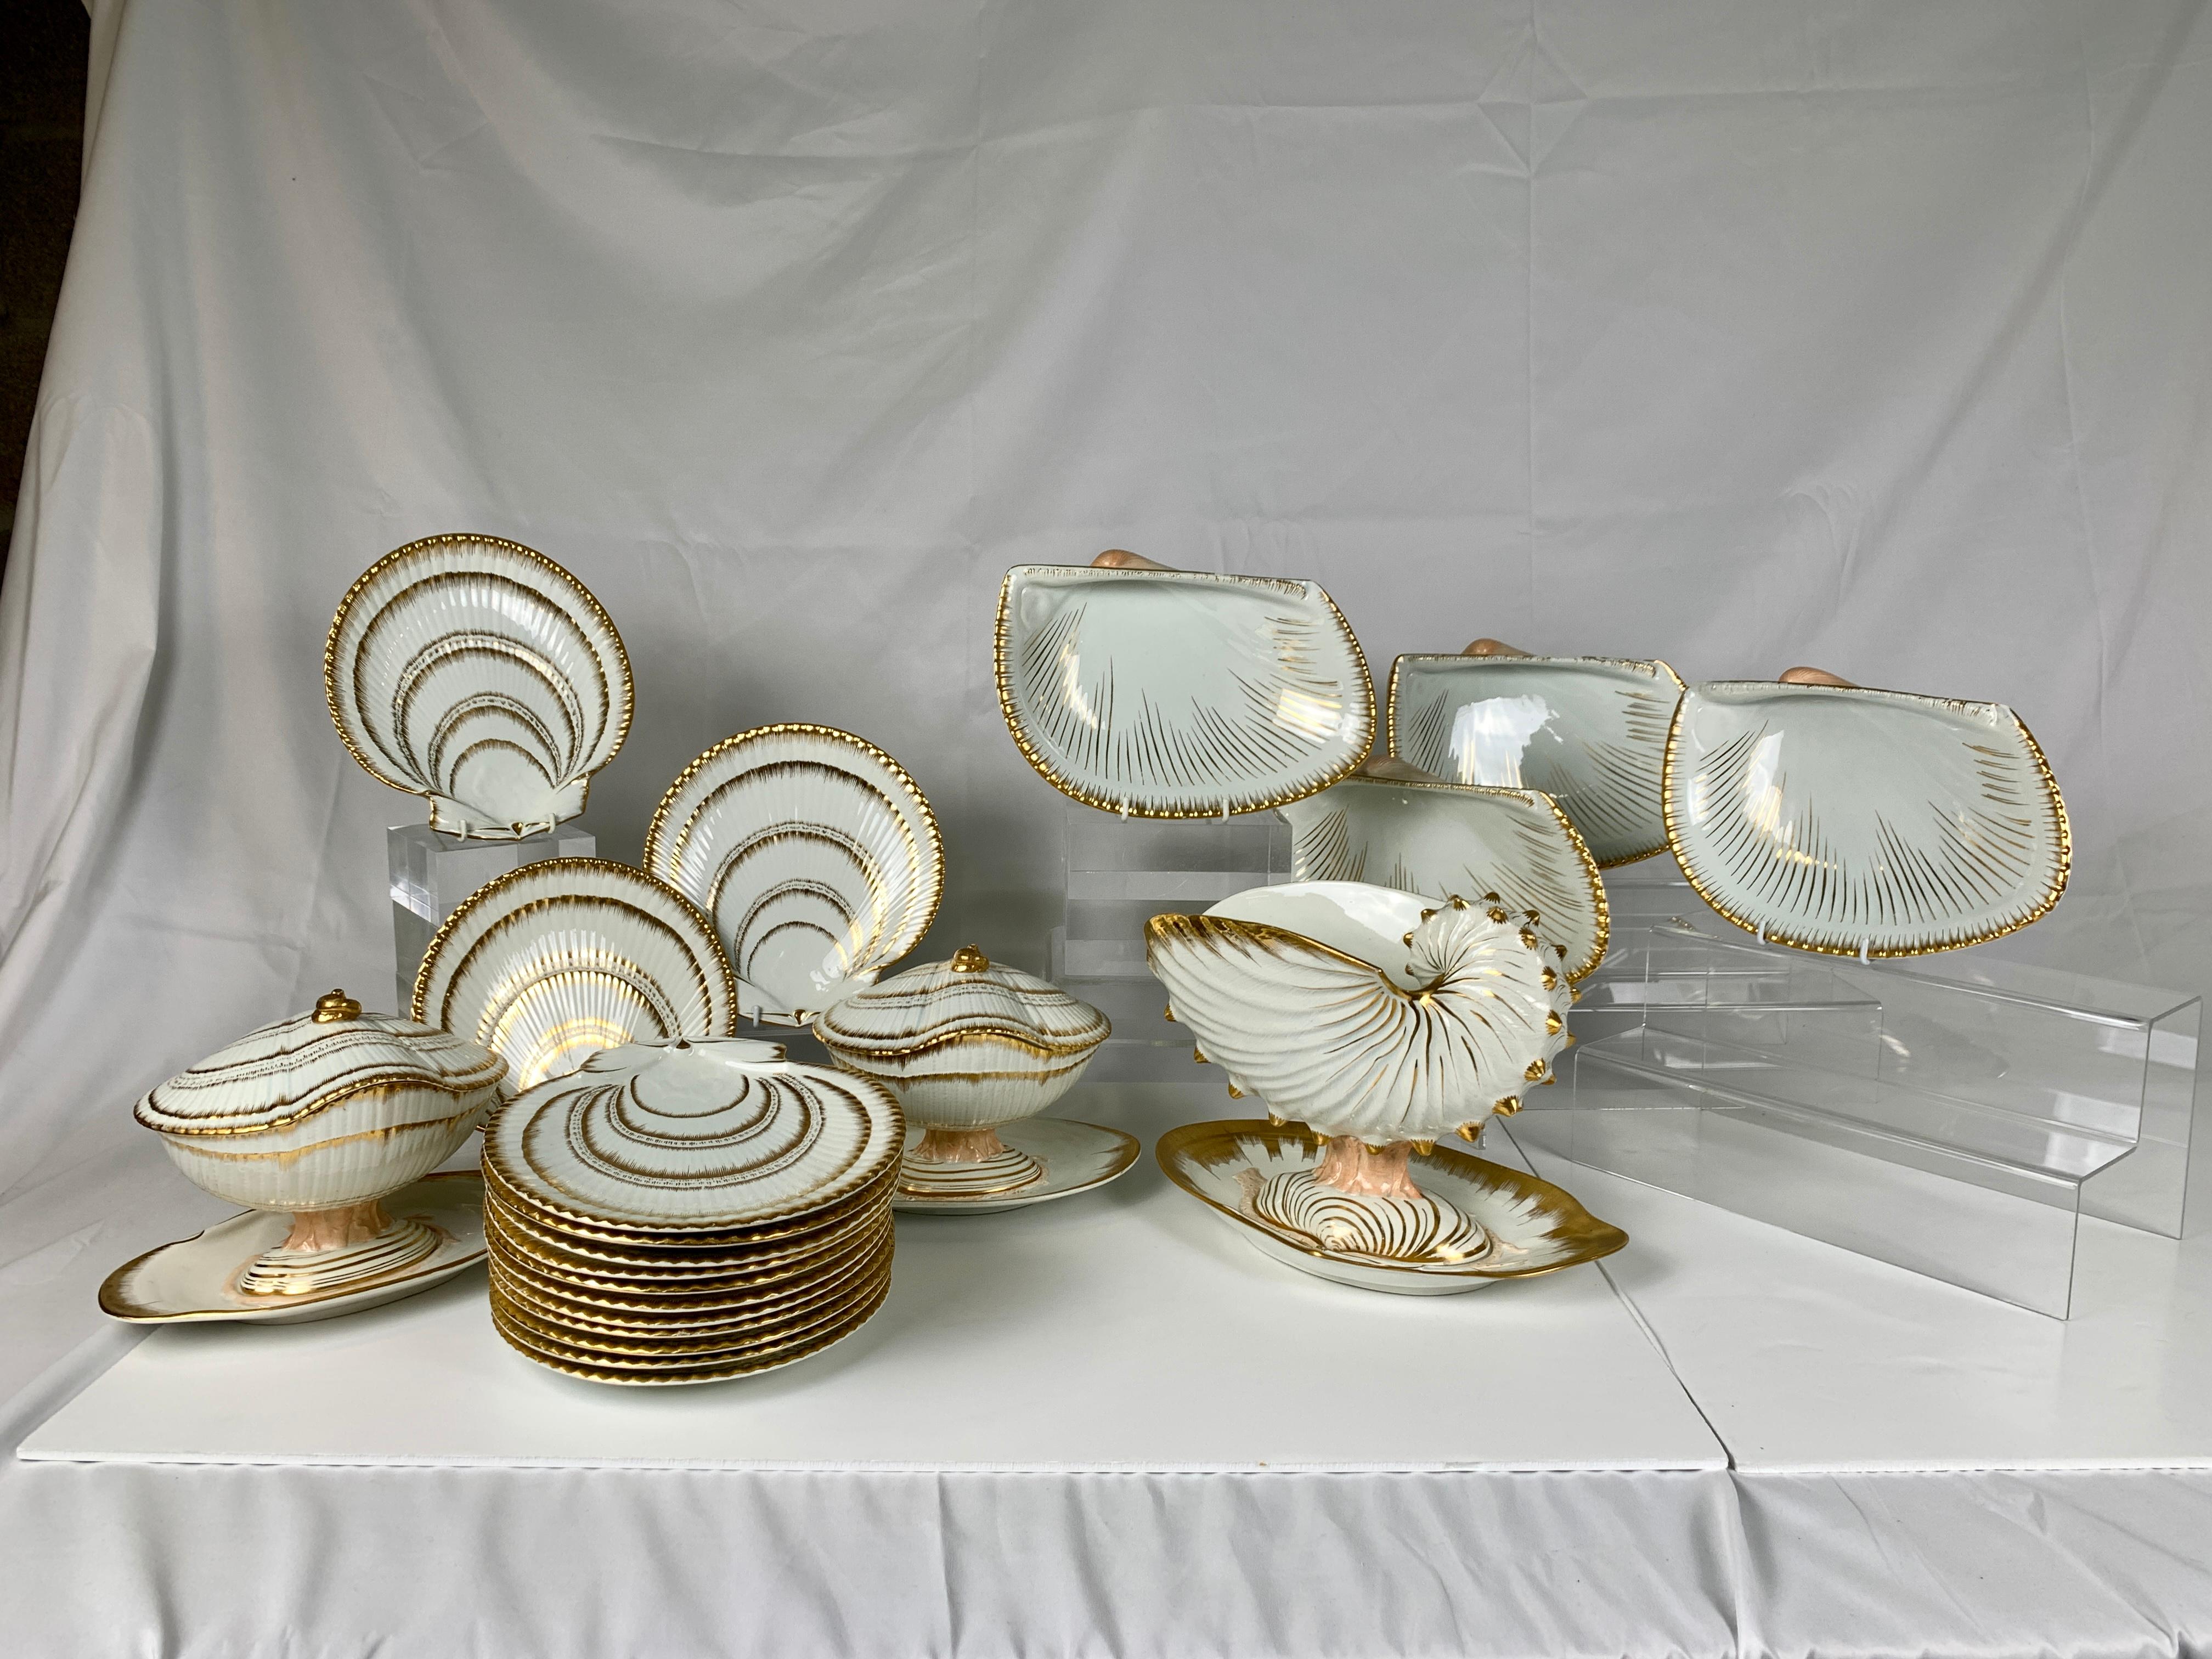 19th Century Wedgwood Set with Scallop Shell Shaped Dishes, Clam Shaped Tureens & a Nautilus